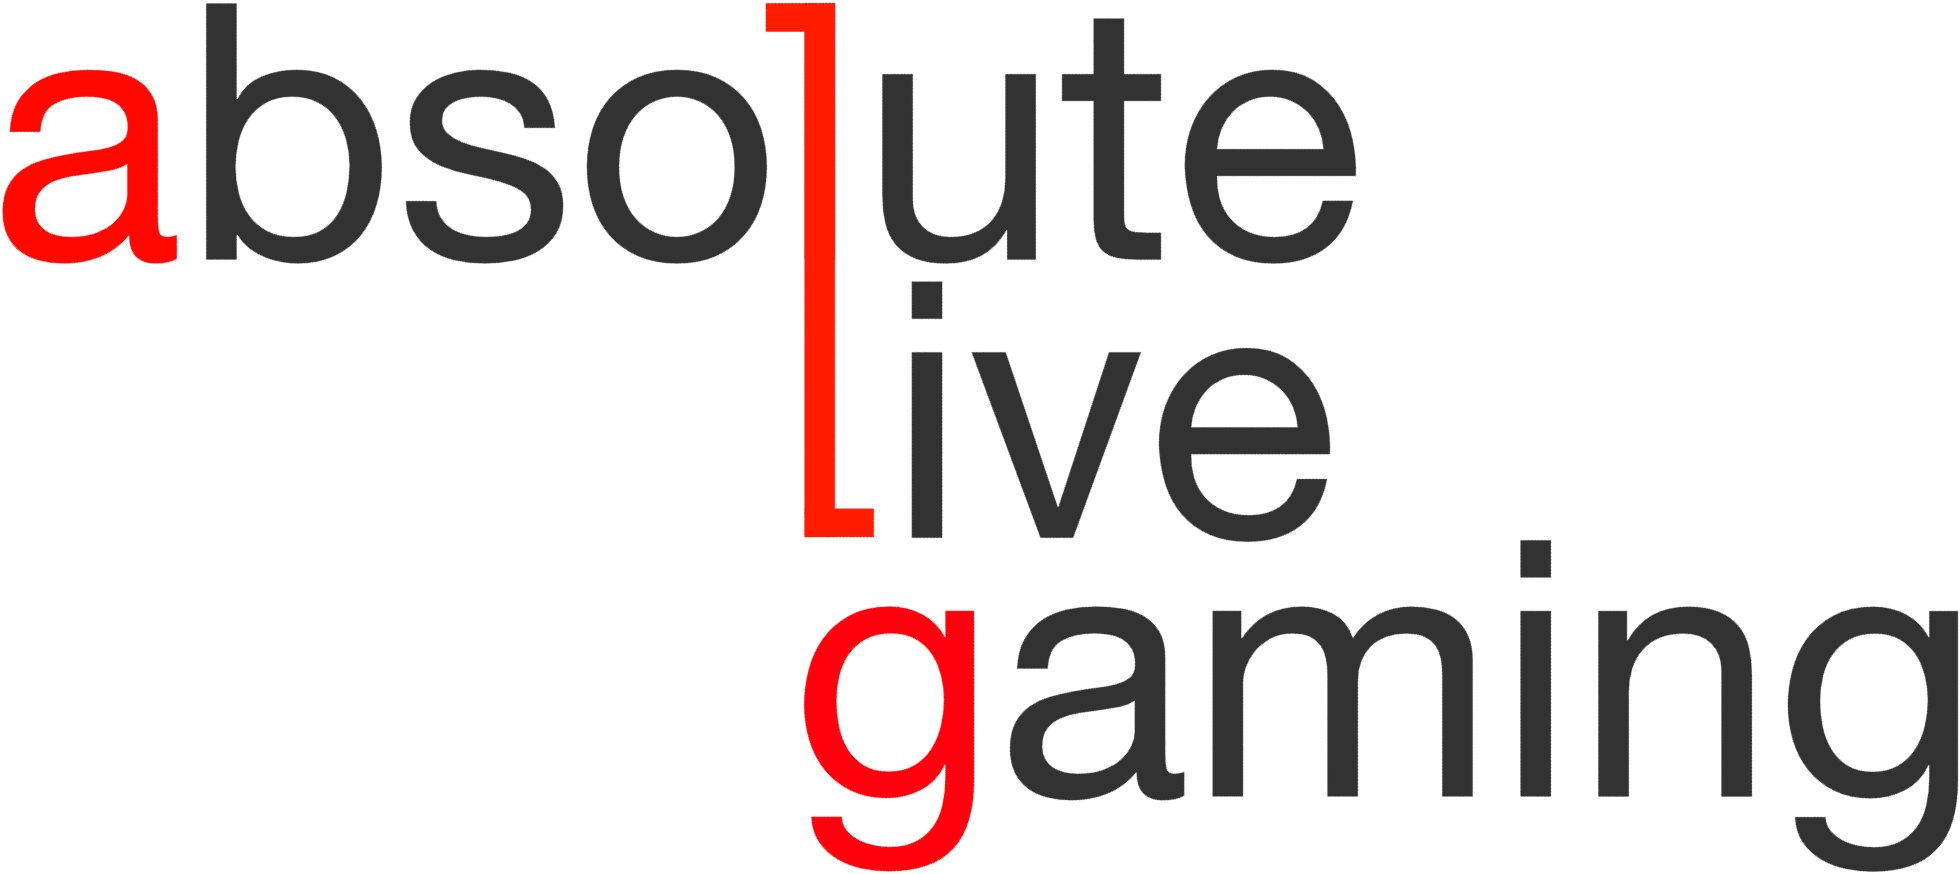 Absolute Live Gaming (ALG)